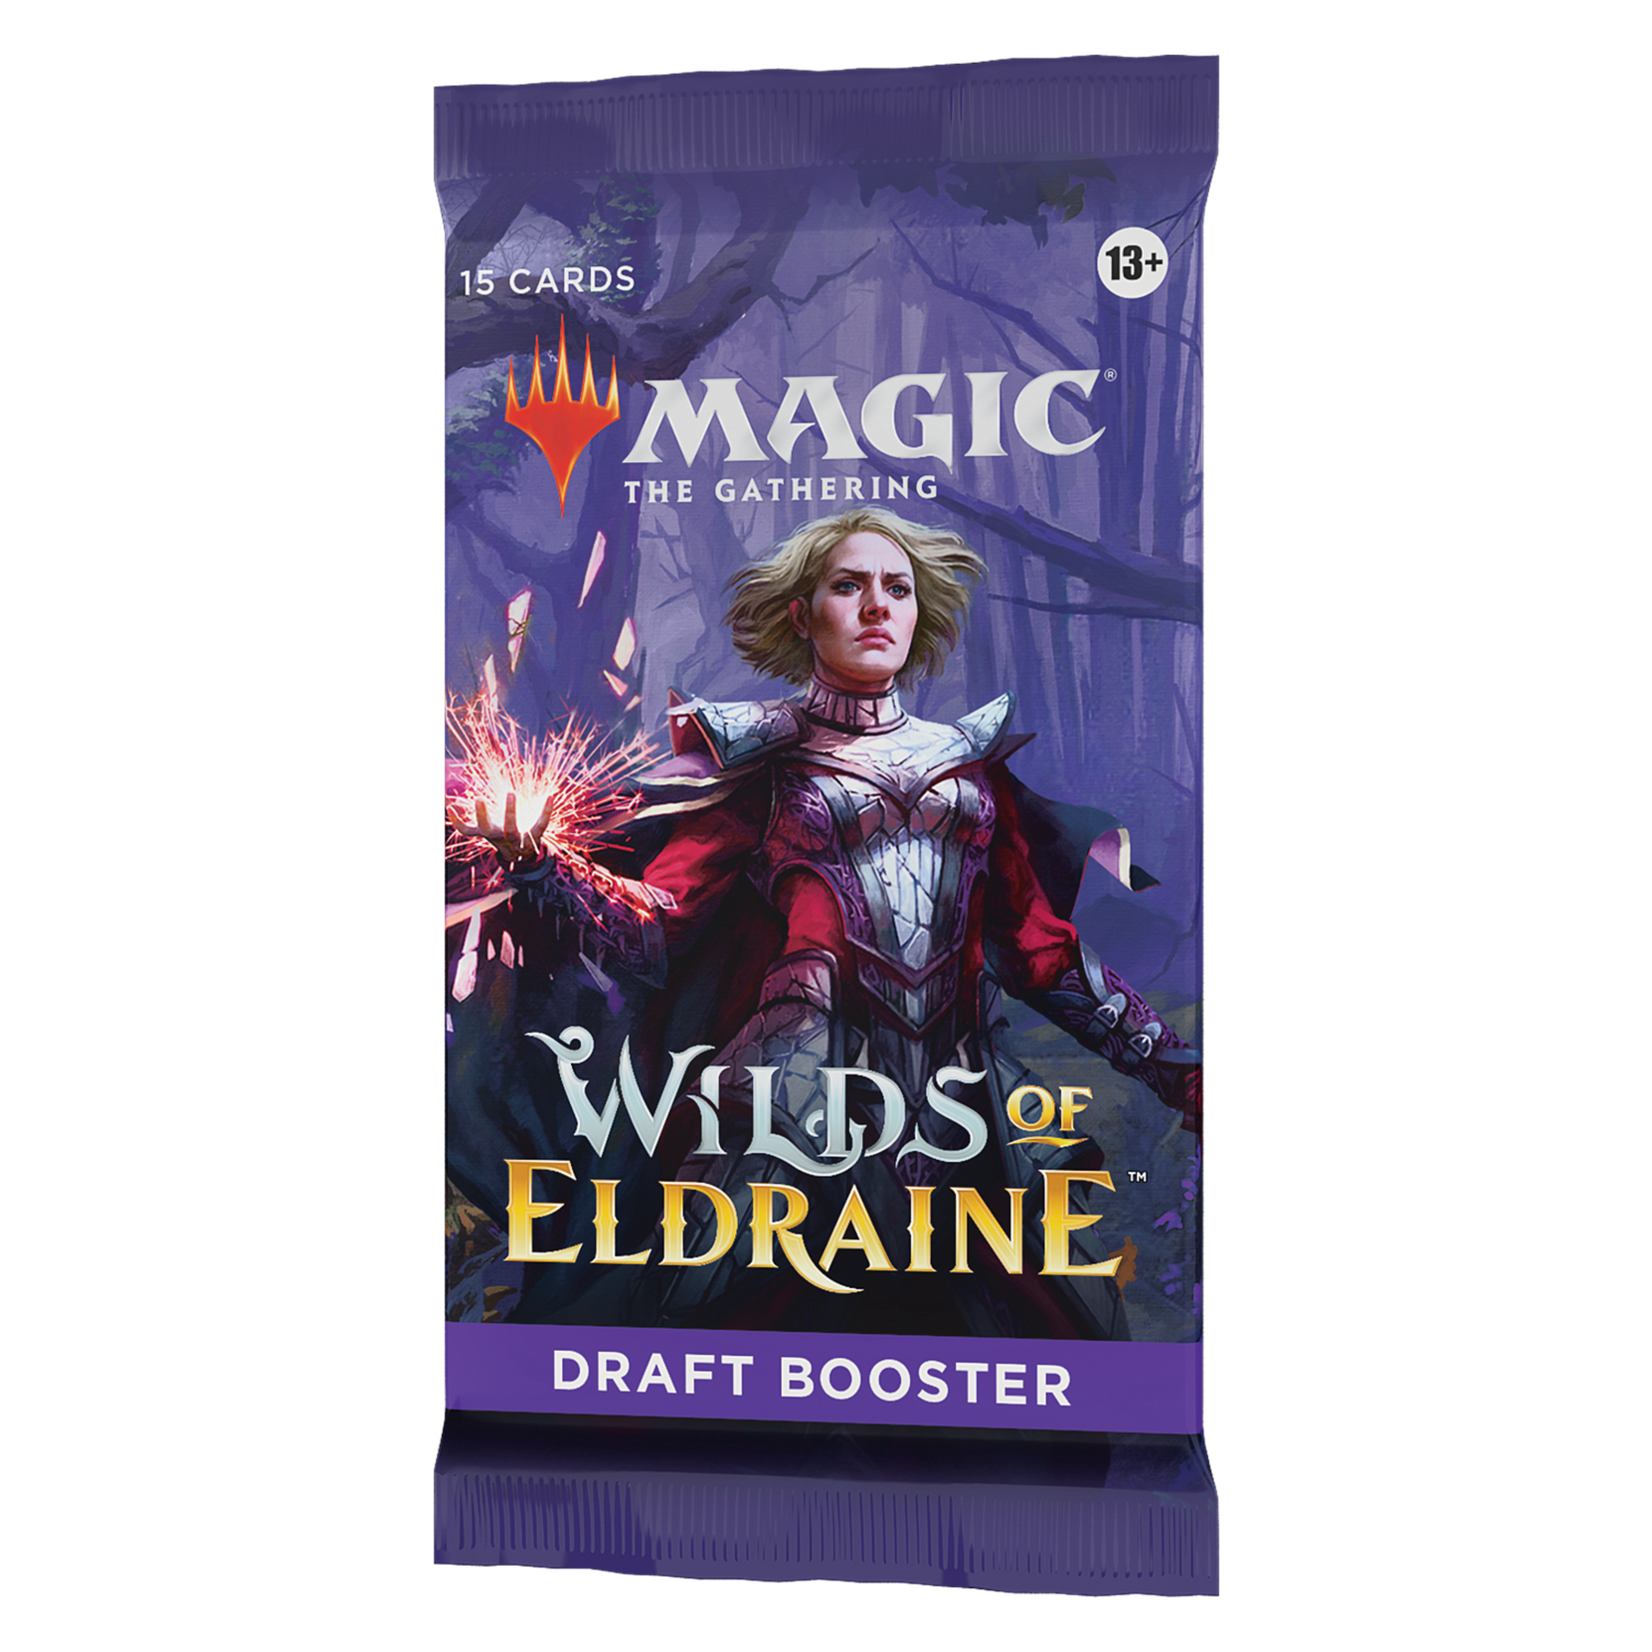 Magic: The Gathering Magic: The Gathering – Wilds of Eldraine Draft Booster Pack